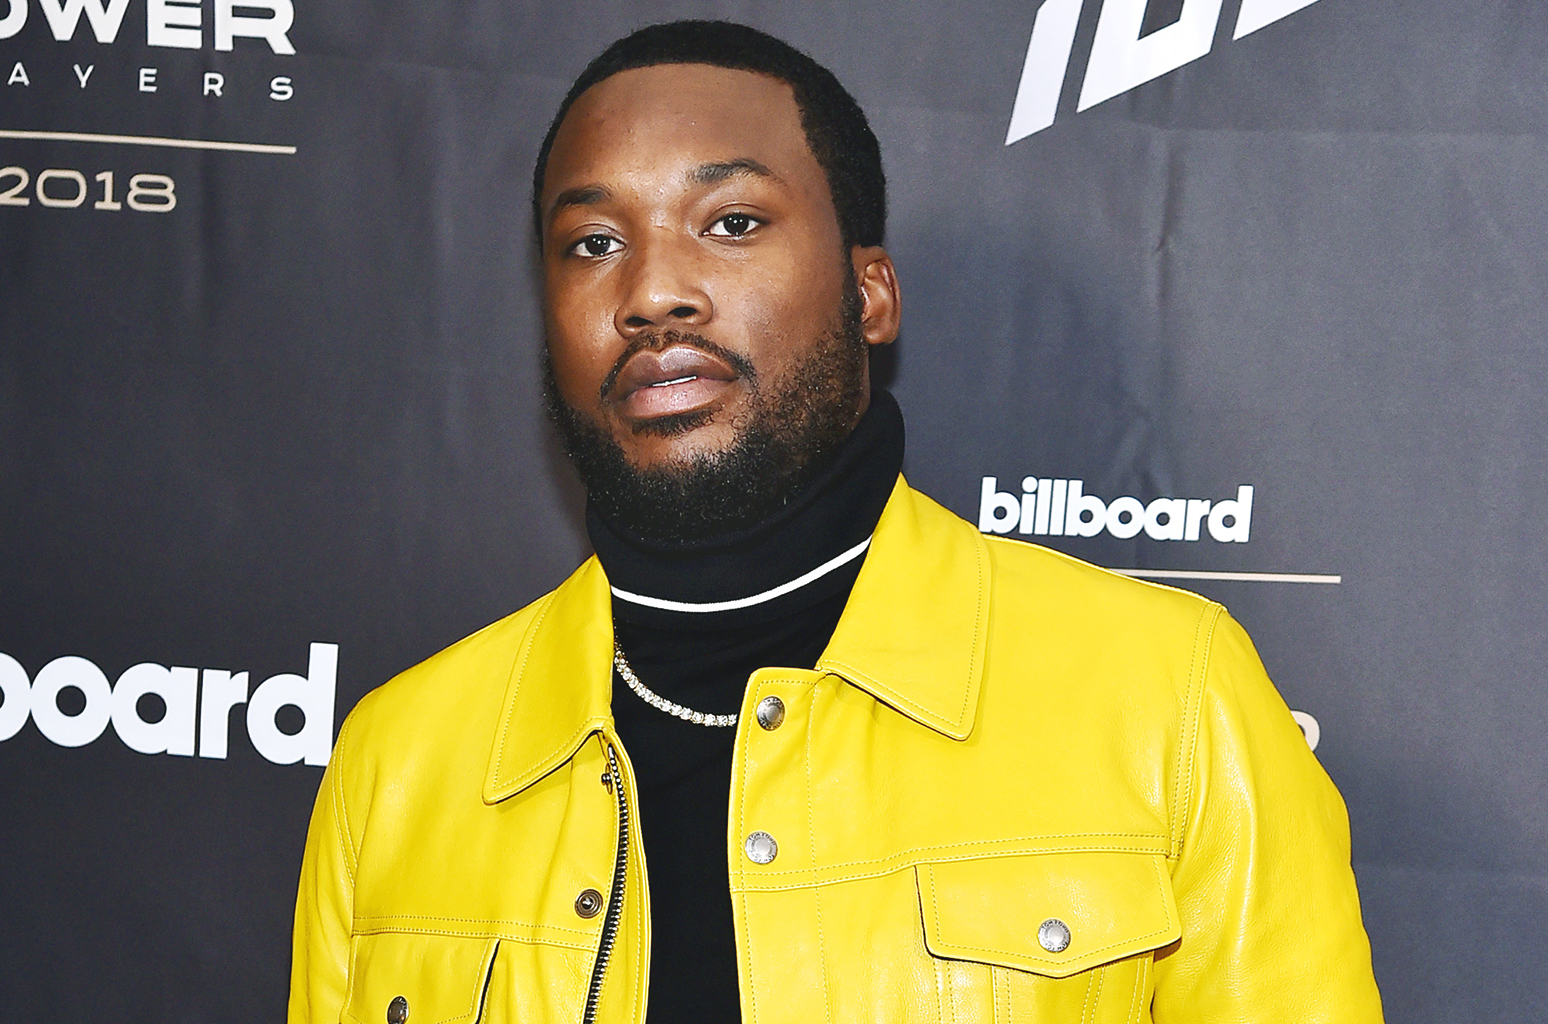 Meek Mill confirms earning $1 million per song amidst rap industry discussions